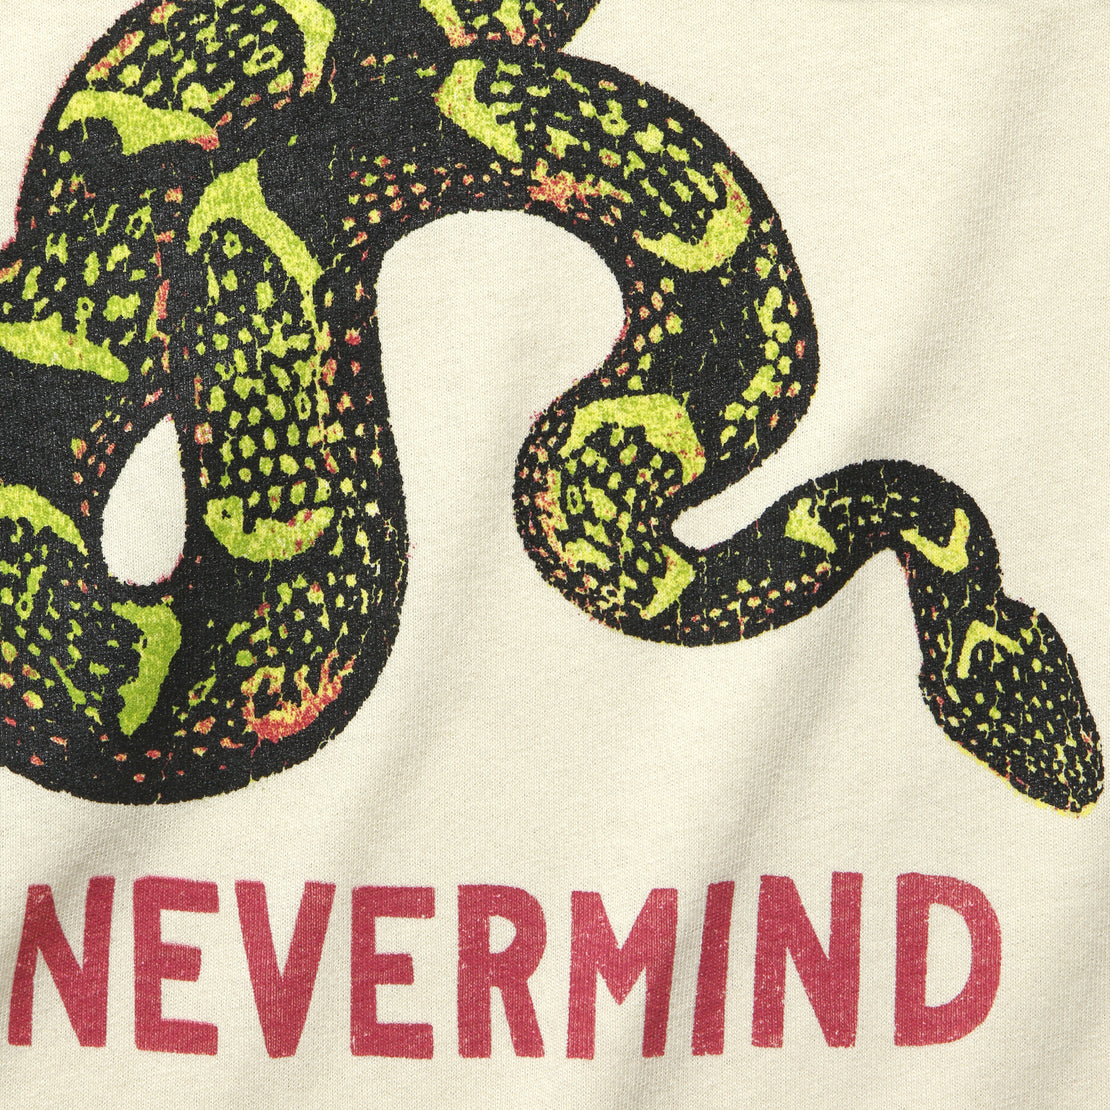 Nevermind Tee - Vintage White - Imogene + Willie - STAG Provisions - Tops - S/S Tee - Graphic